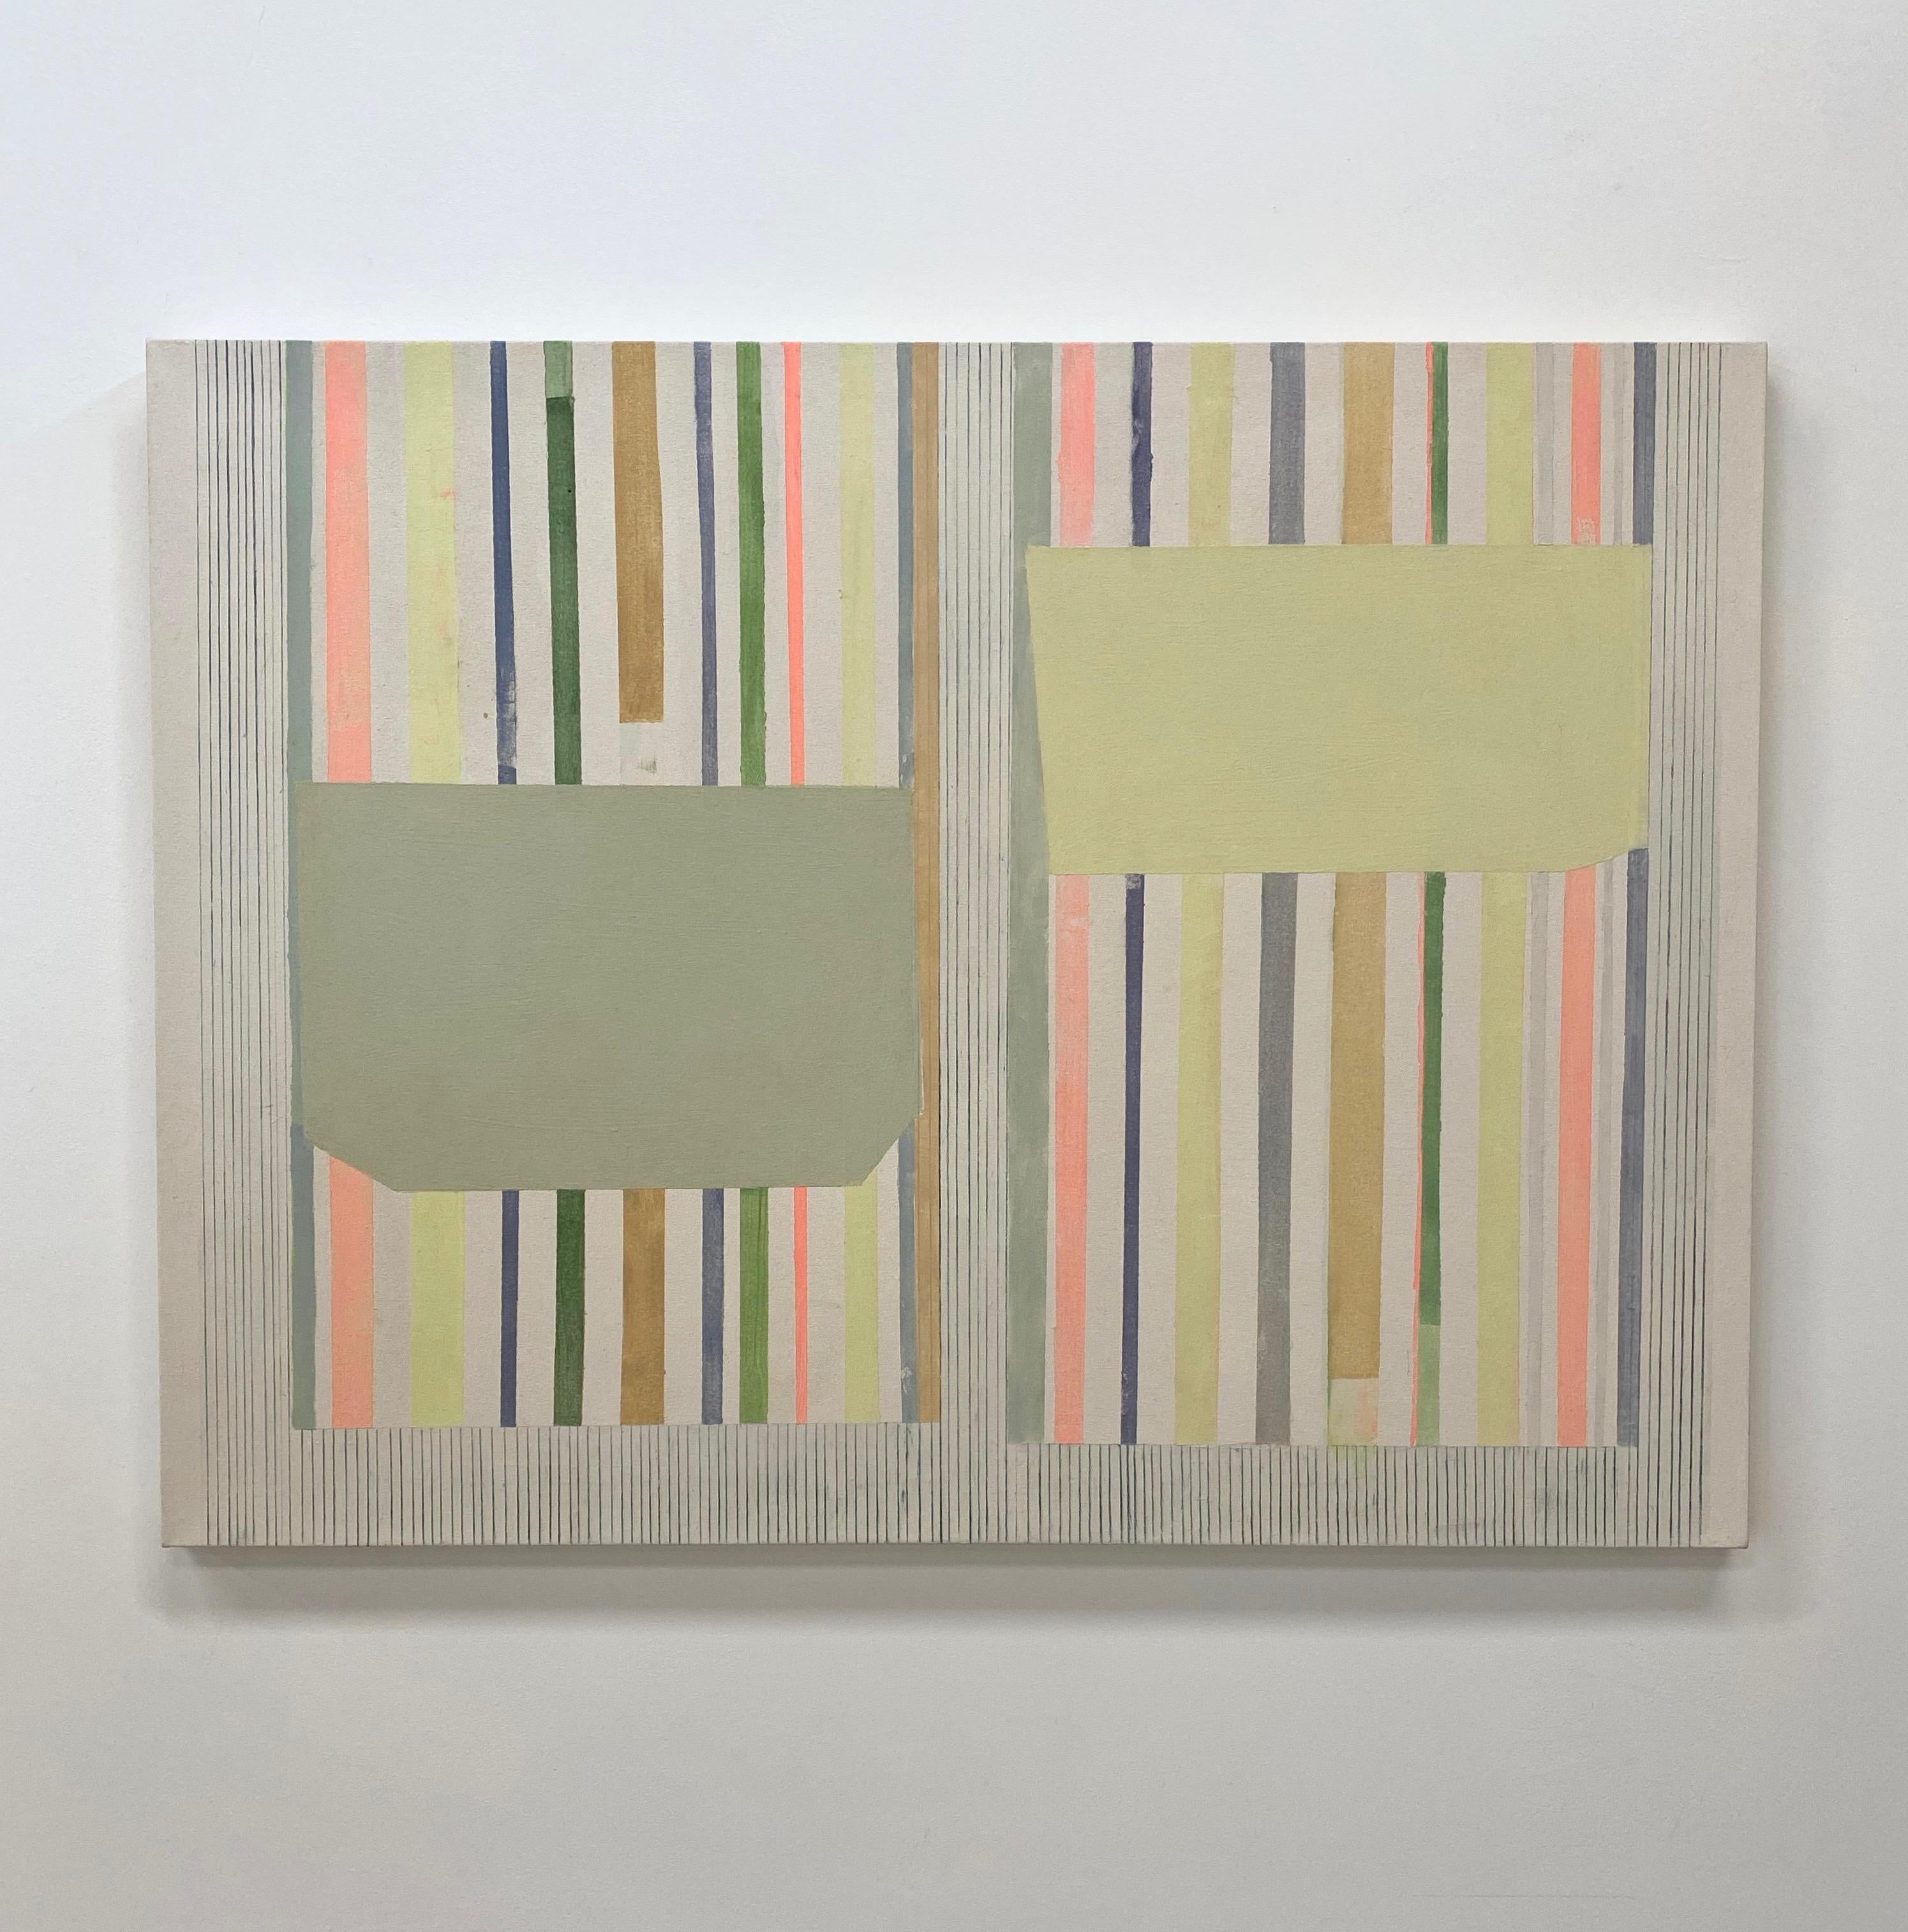 Ashgreylime, Beige, Light Green, Sage, Lemon Yellow Stripes, Geometric Abstract - Painting by Elizabeth Gourlay